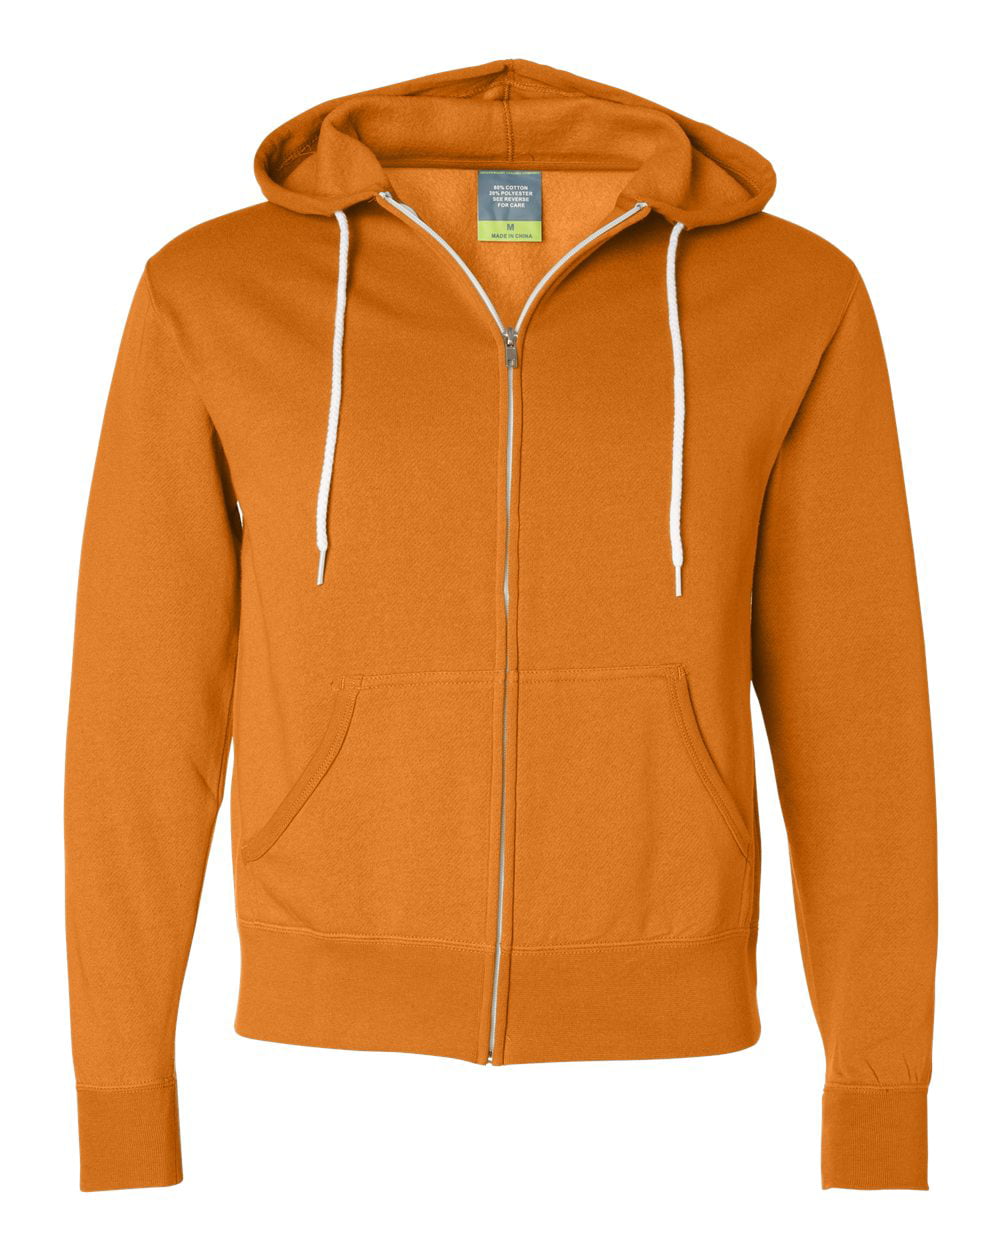 Independent Trading Co Unisex Lightweight Full-Zip Hooded